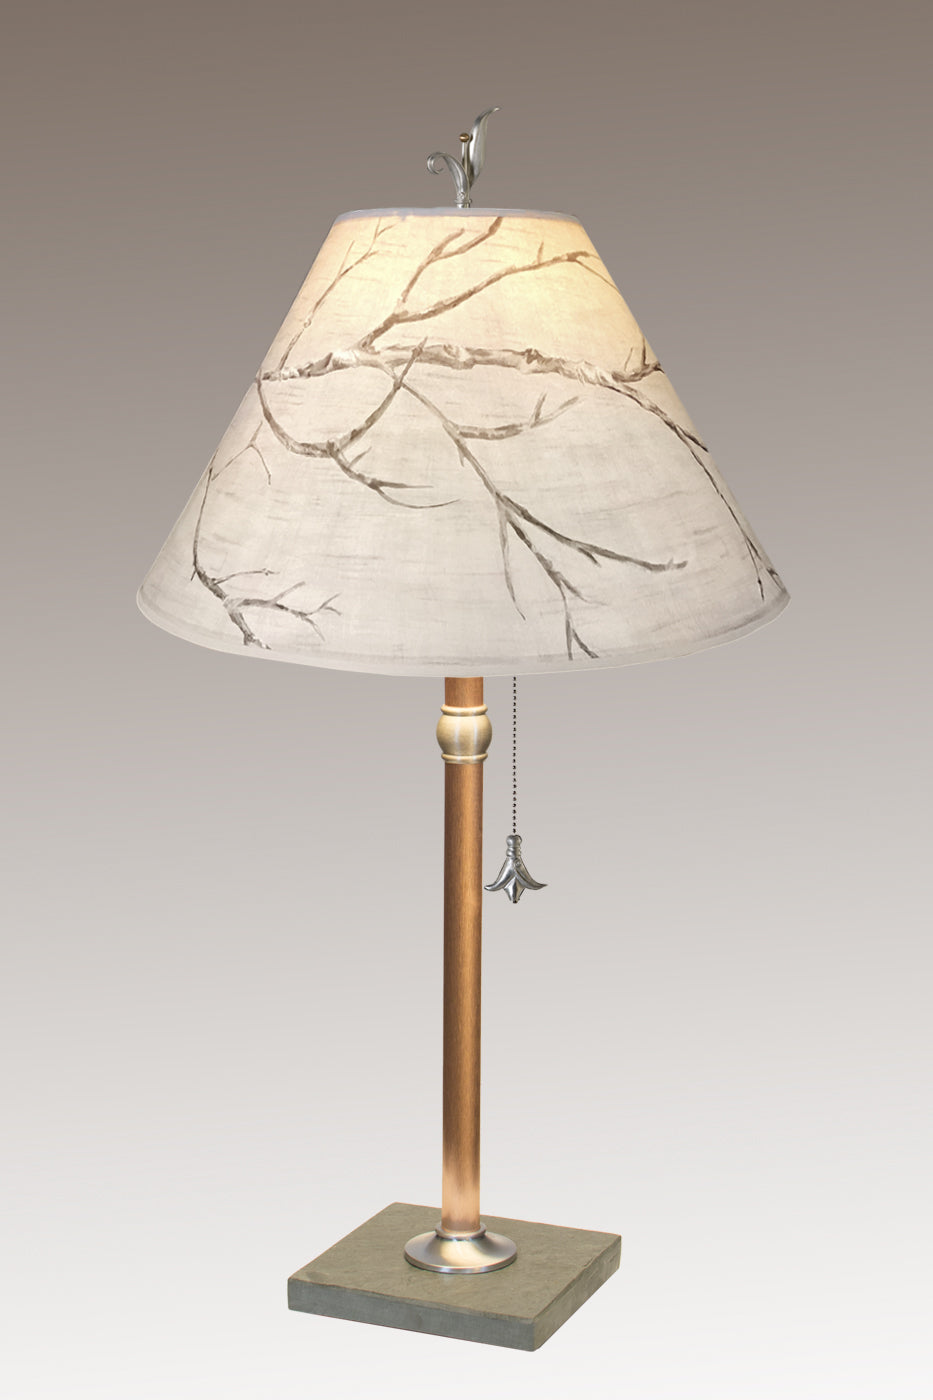 Copper Table Lamp with Medium Conical Shade in Sweeping Branch